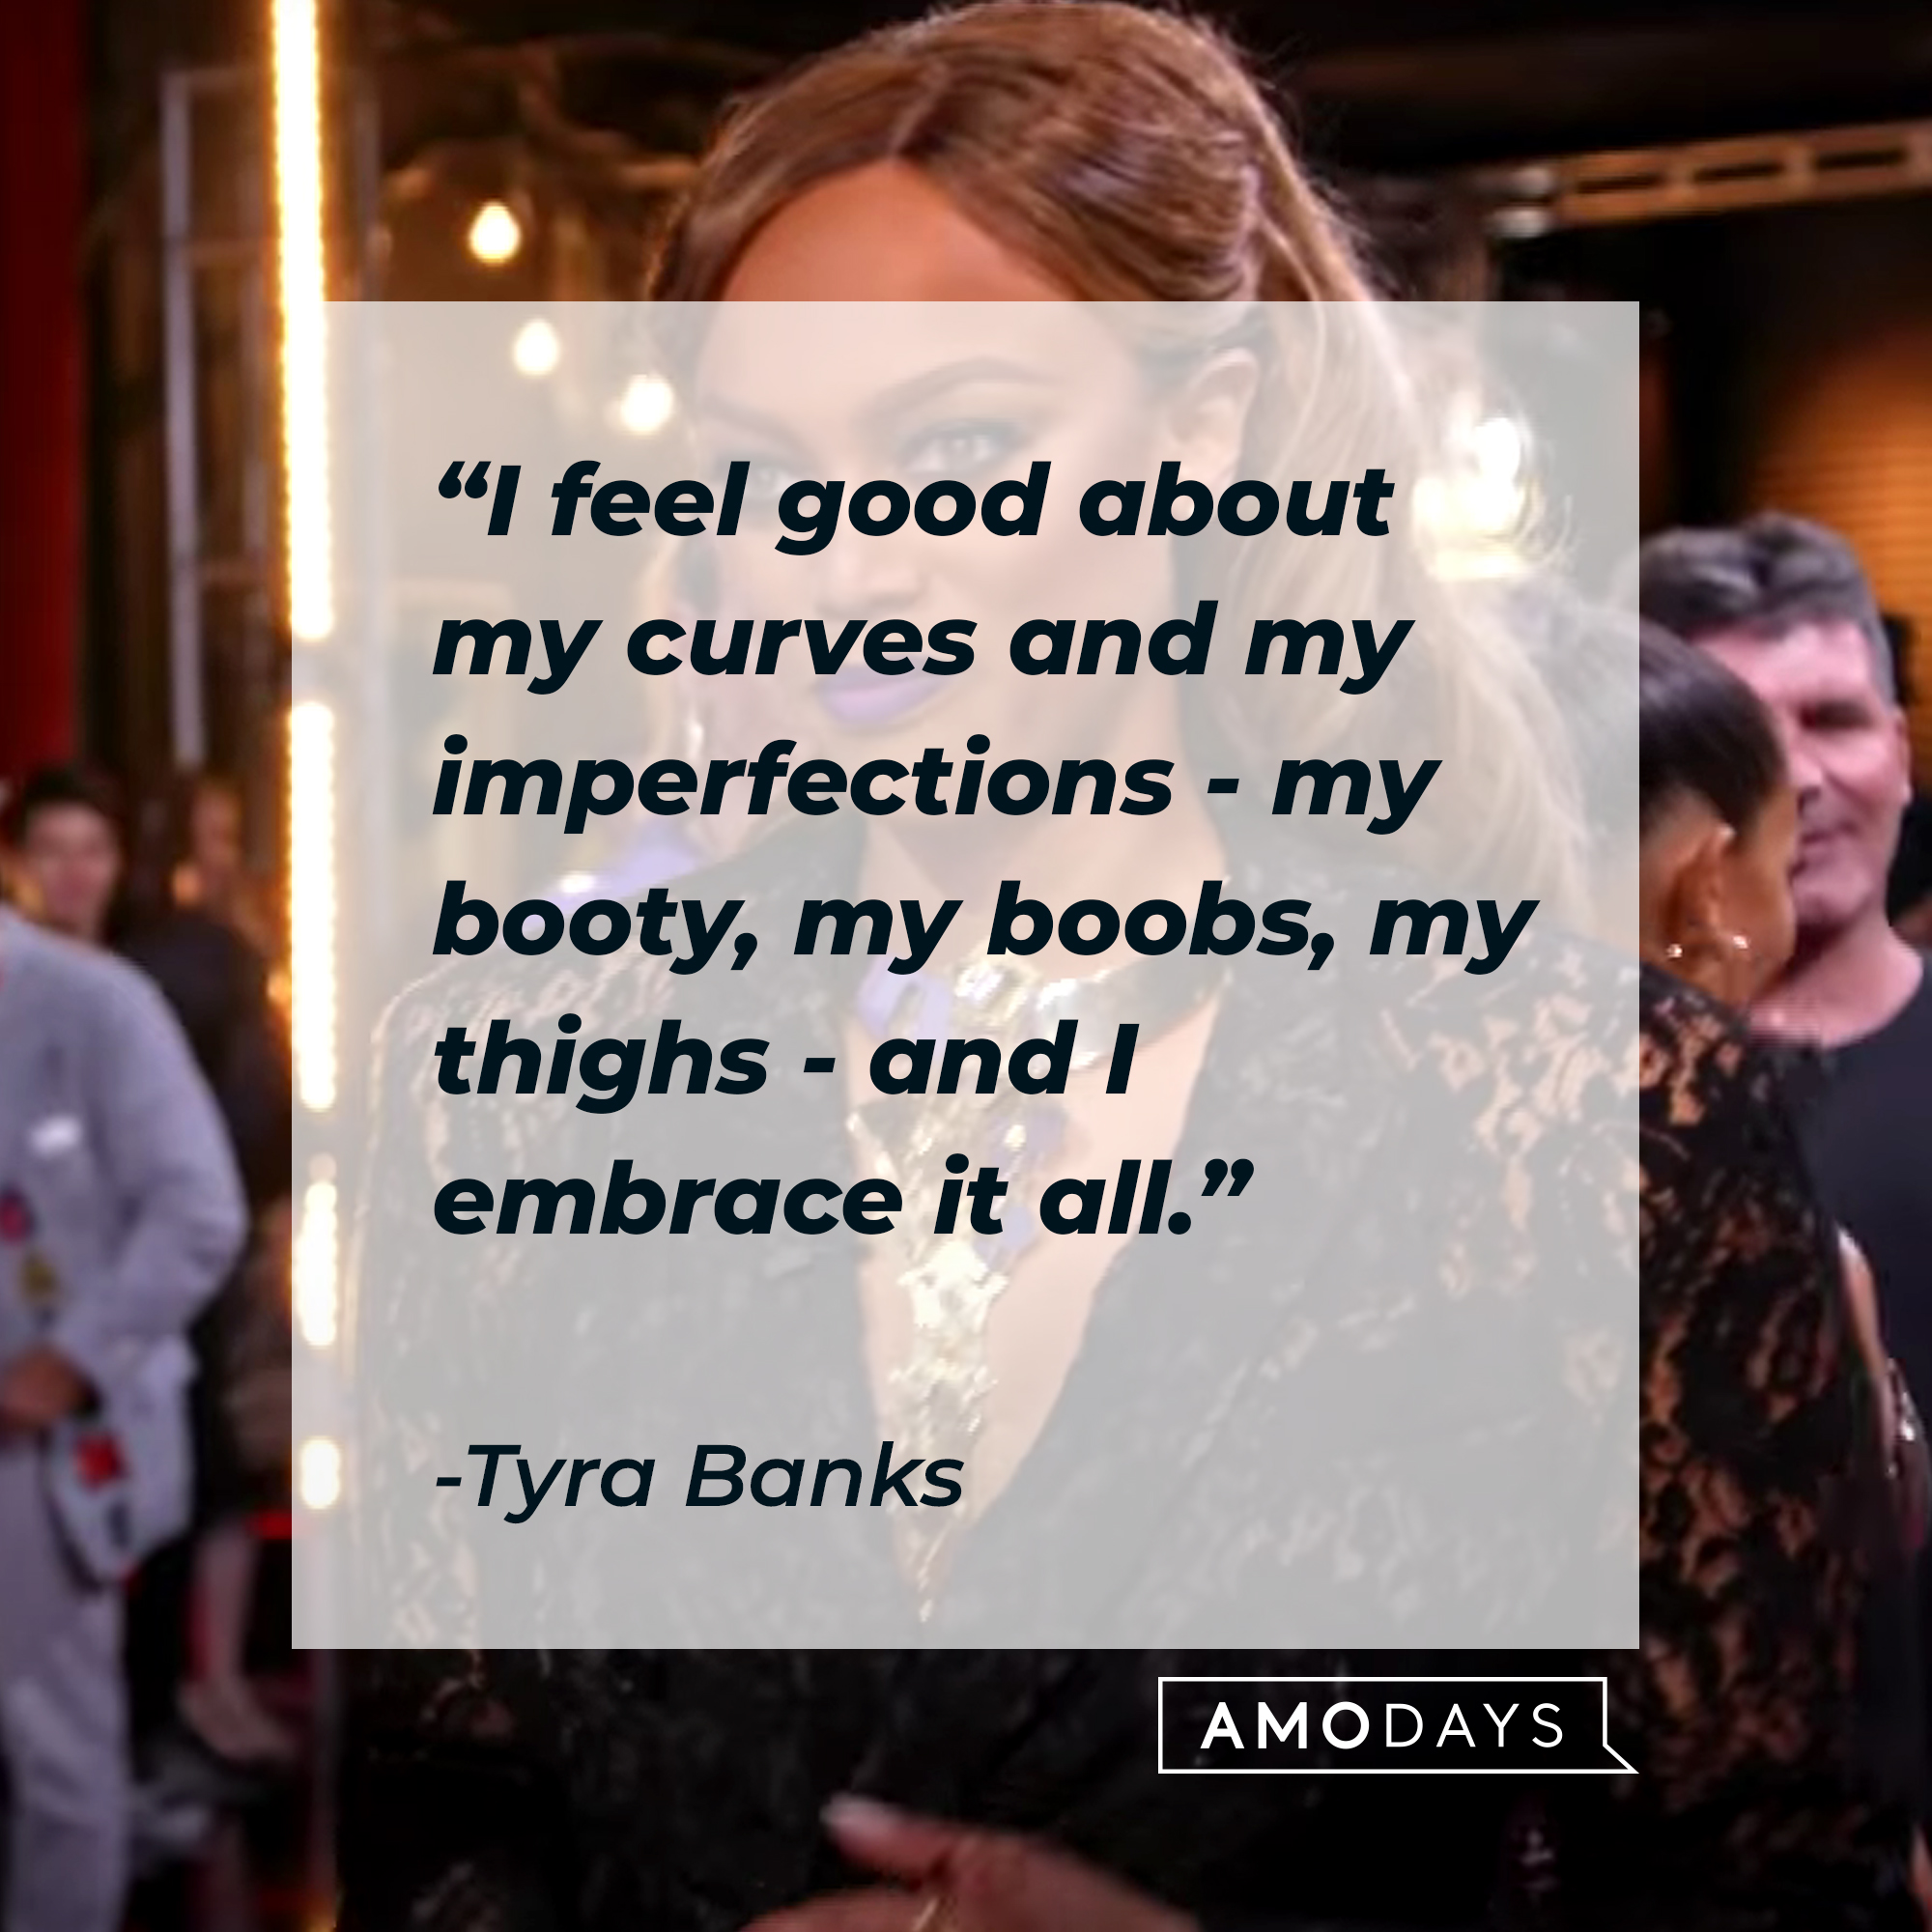 Tyra Banks' quote: "I feel good about my curves and my imperfections - my booty, my boobs, my thighs - and I embrace it all." | Source: Getty Images